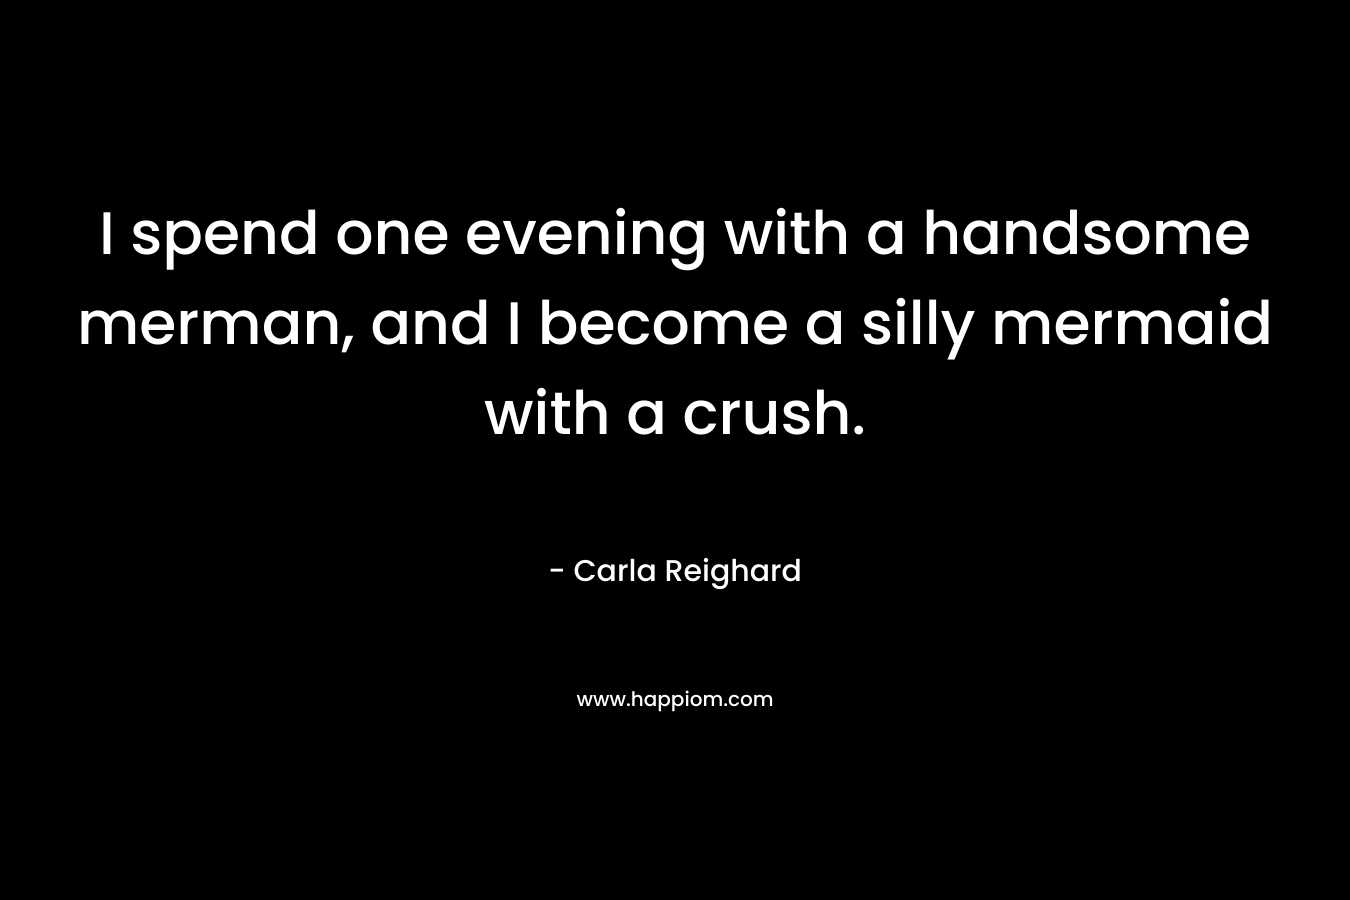 I spend one evening with a handsome merman, and I become a silly mermaid with a crush. – Carla Reighard